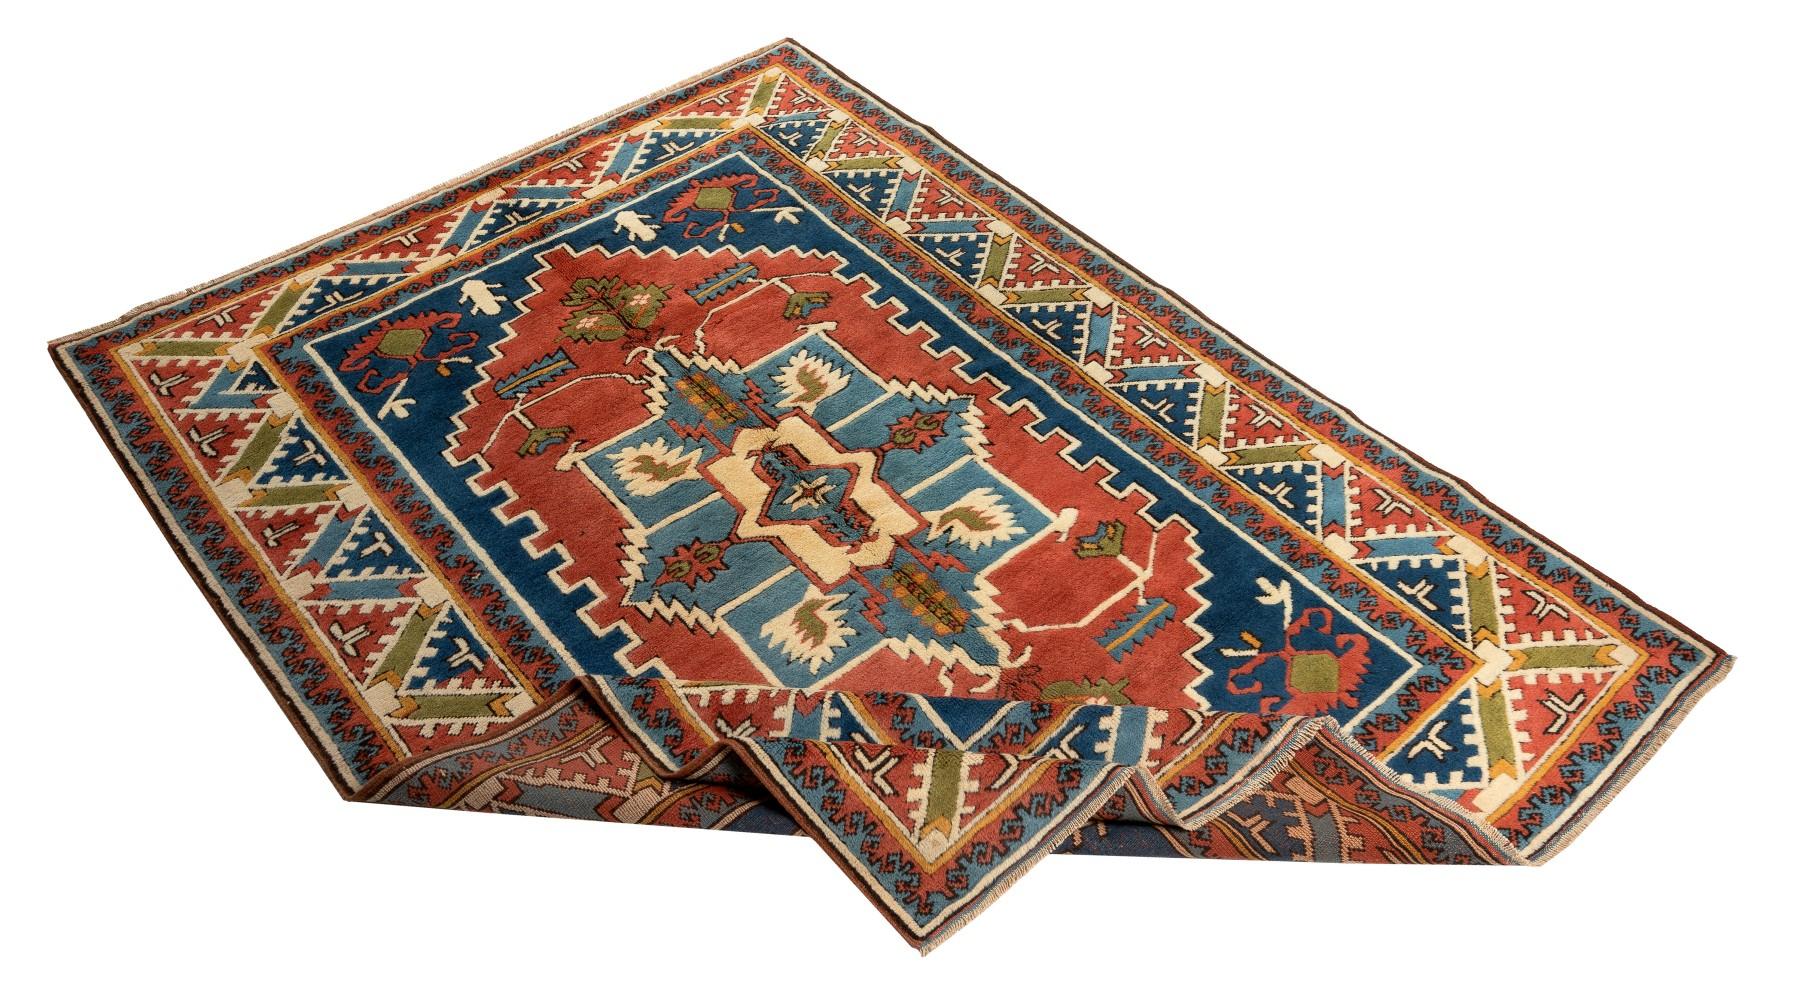 A brand new hand-knotted Turkish rug with excellent, lustrous, soft medium wool pile. The rug features a geometrical latch-hook medallion design and a border decorated with half stepped medallions in a gorgeous color palette of deep, saturated and